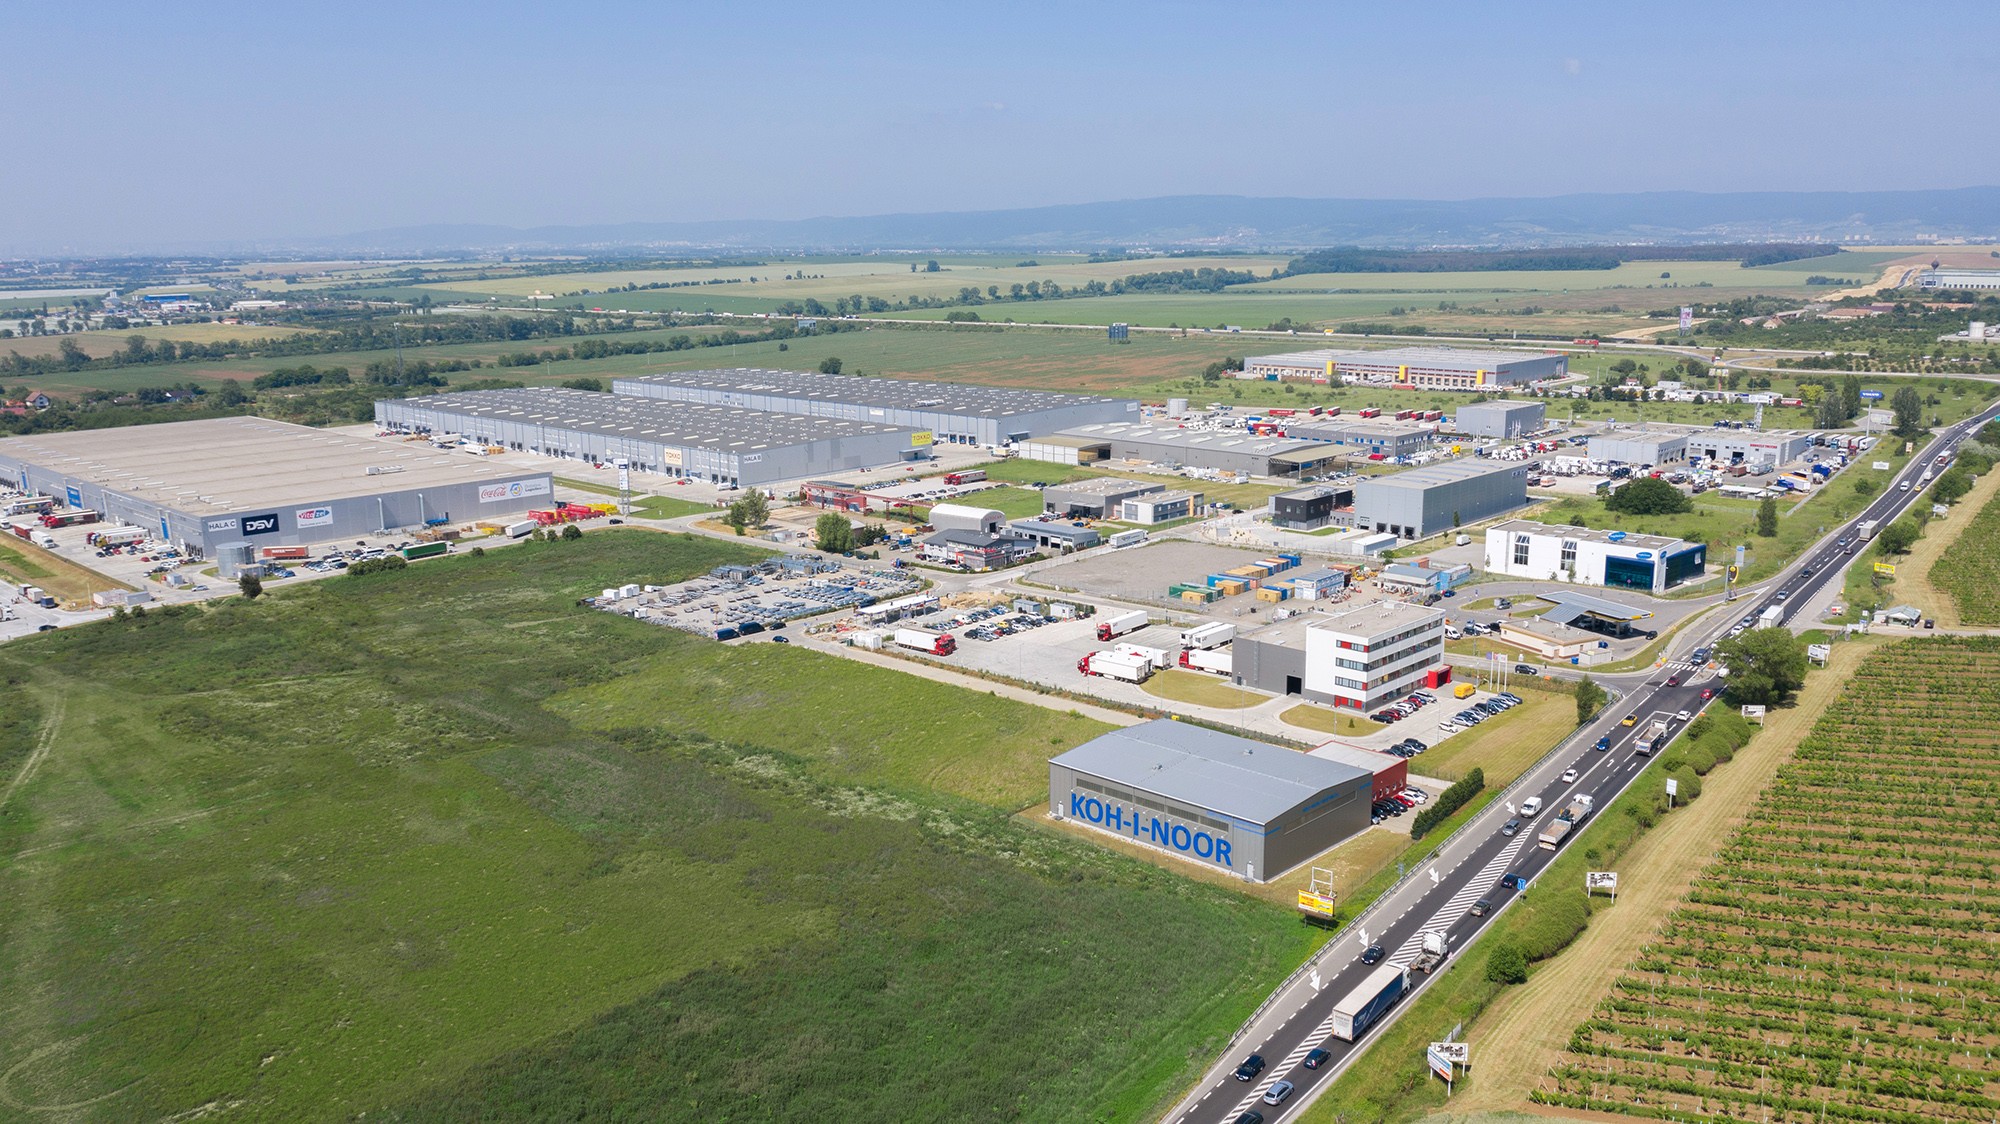 Union Investment and GARBE Acquire First Logistics Property in Slovakia for “UII Garbe Logistik Fonds” Investment Fund